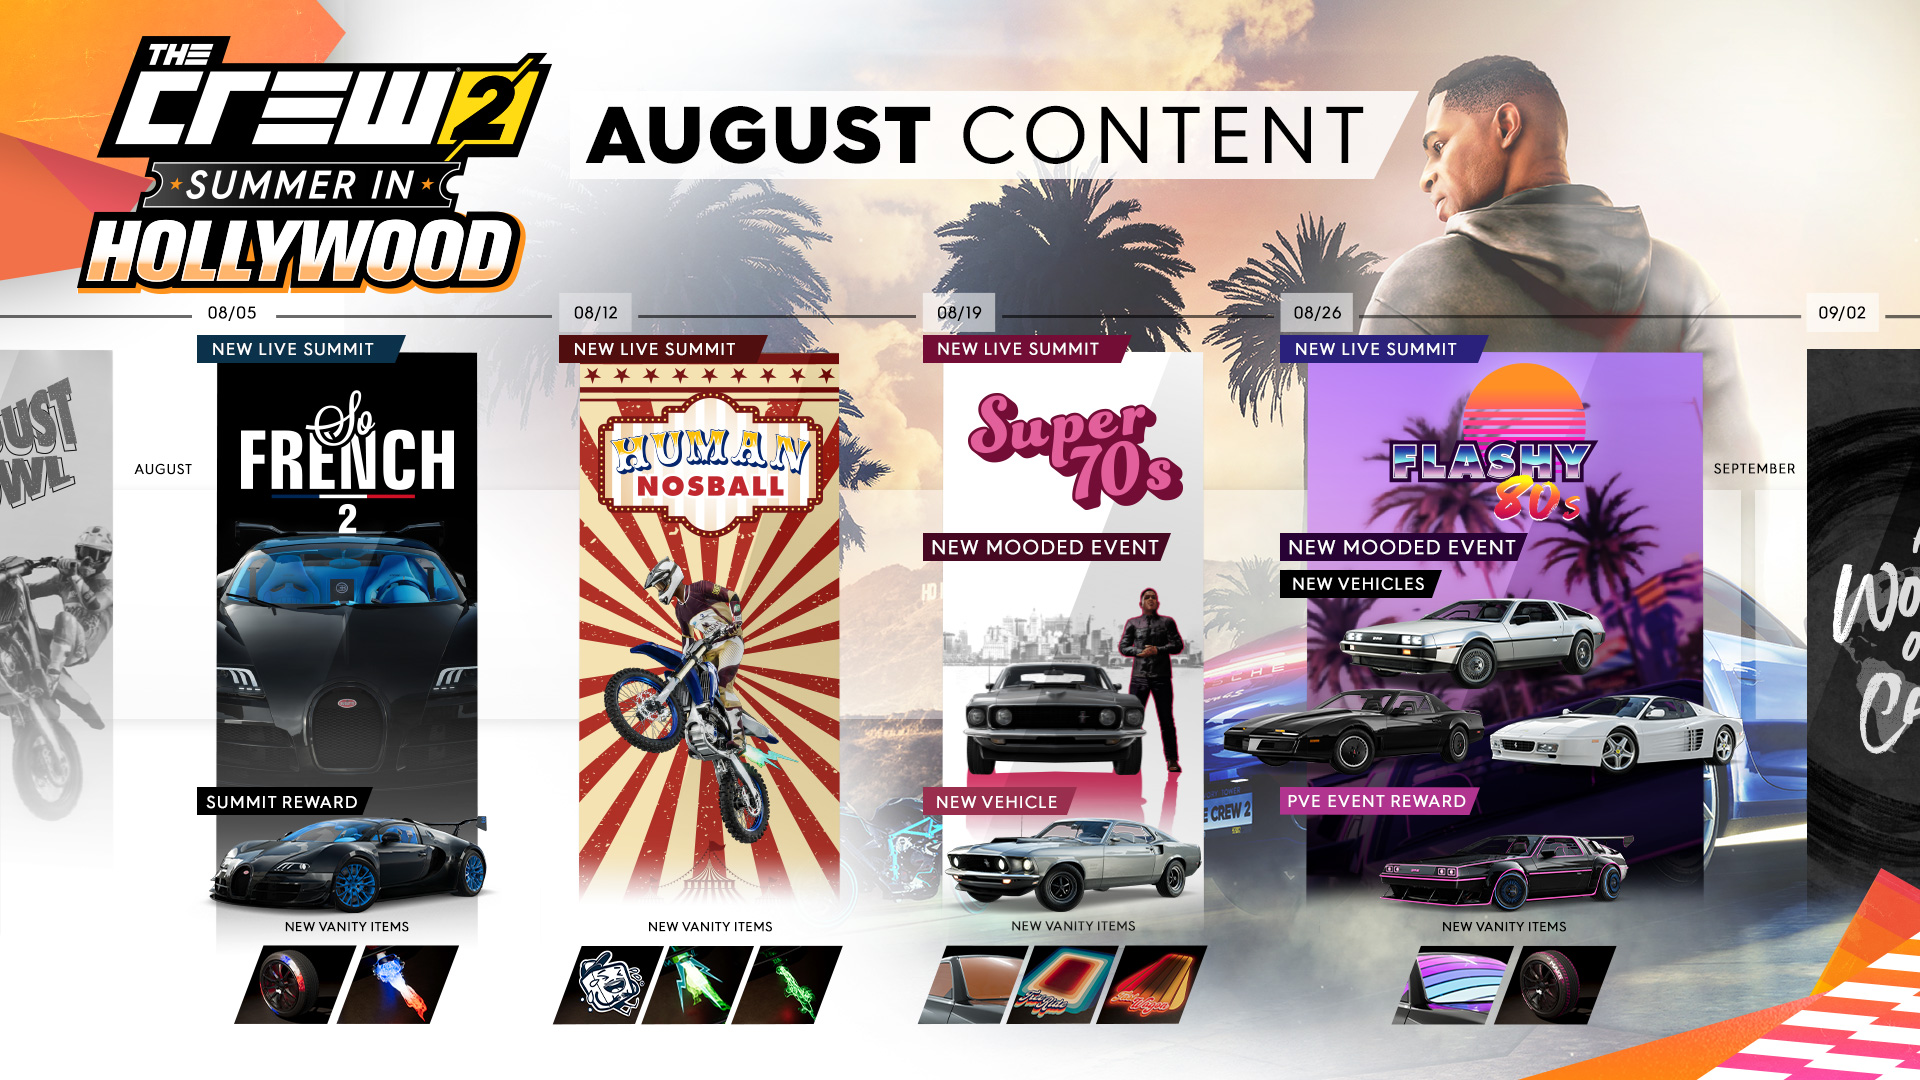 TC2_AUGUST_CONTENT_INFOGRAPHIC